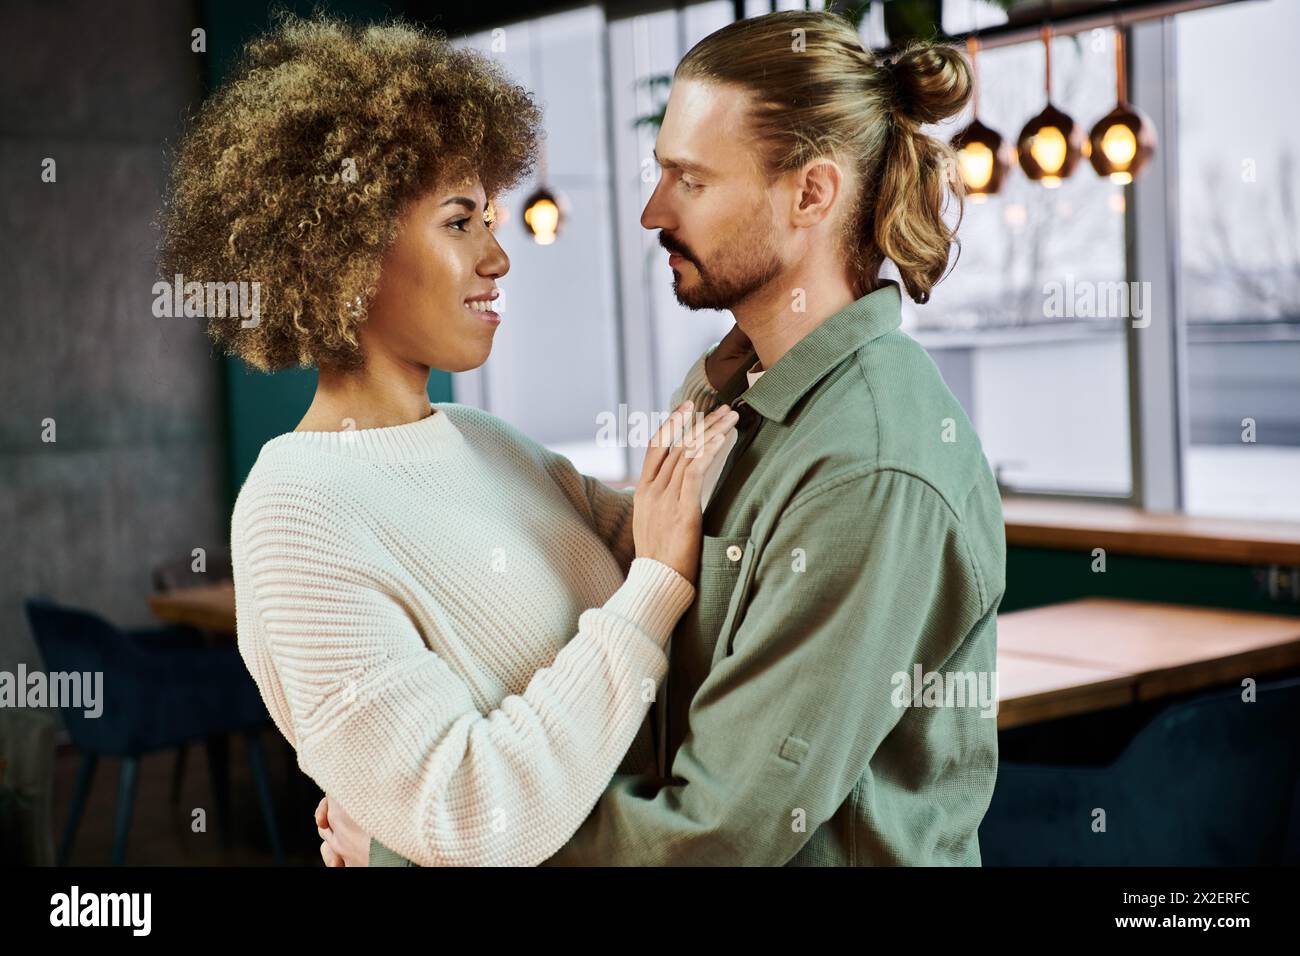 African American woman and man stand side by side, looking out a cafe window, creating a romantic silhouette. Stock Photo